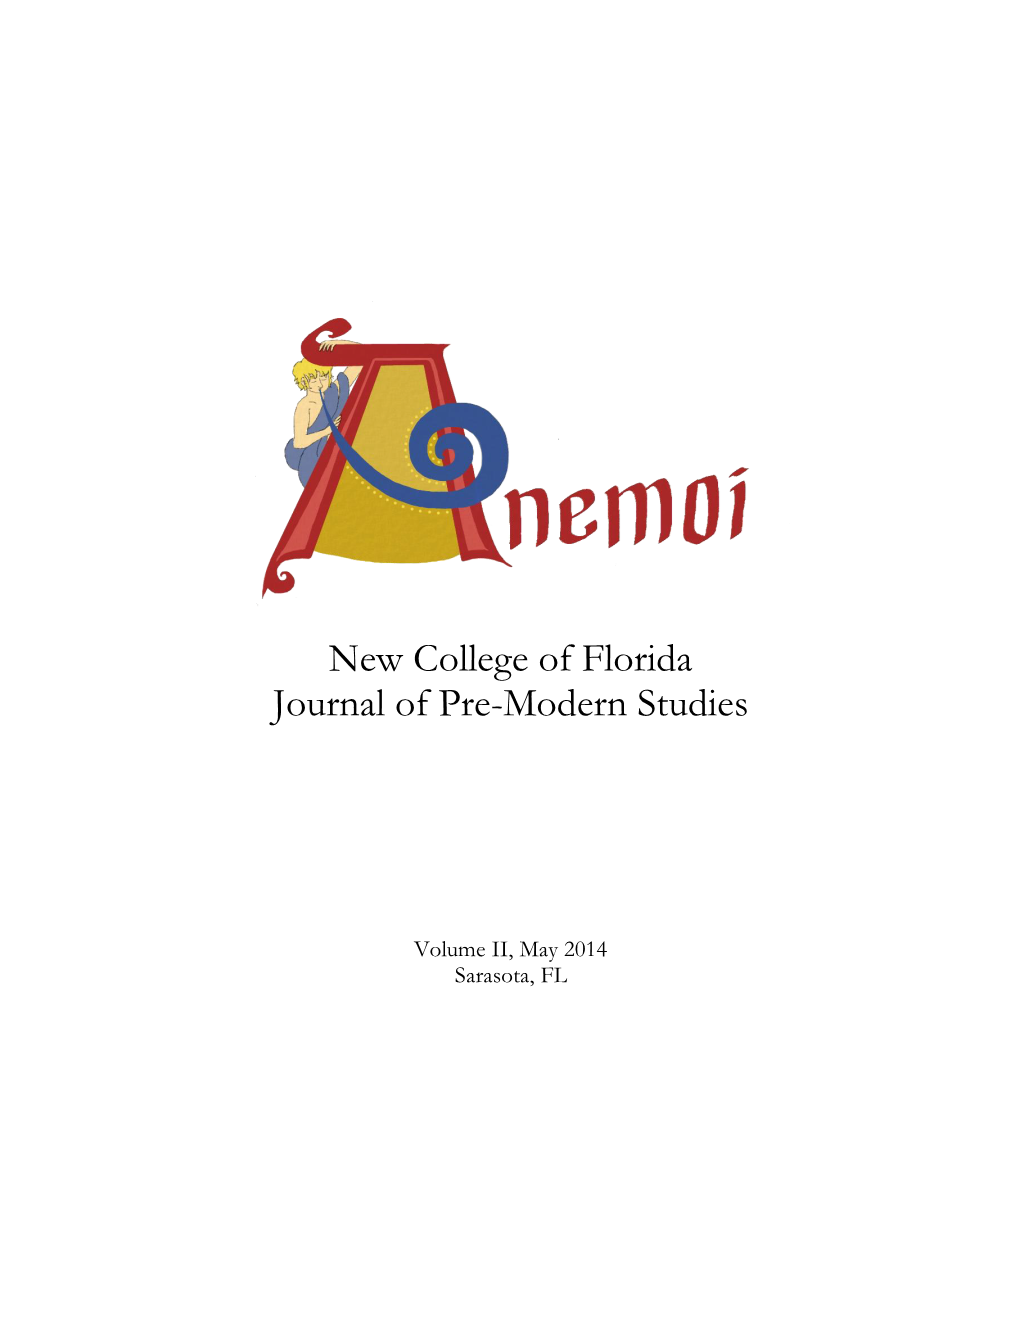 New College of Florida Journal of Pre-Modern Studies